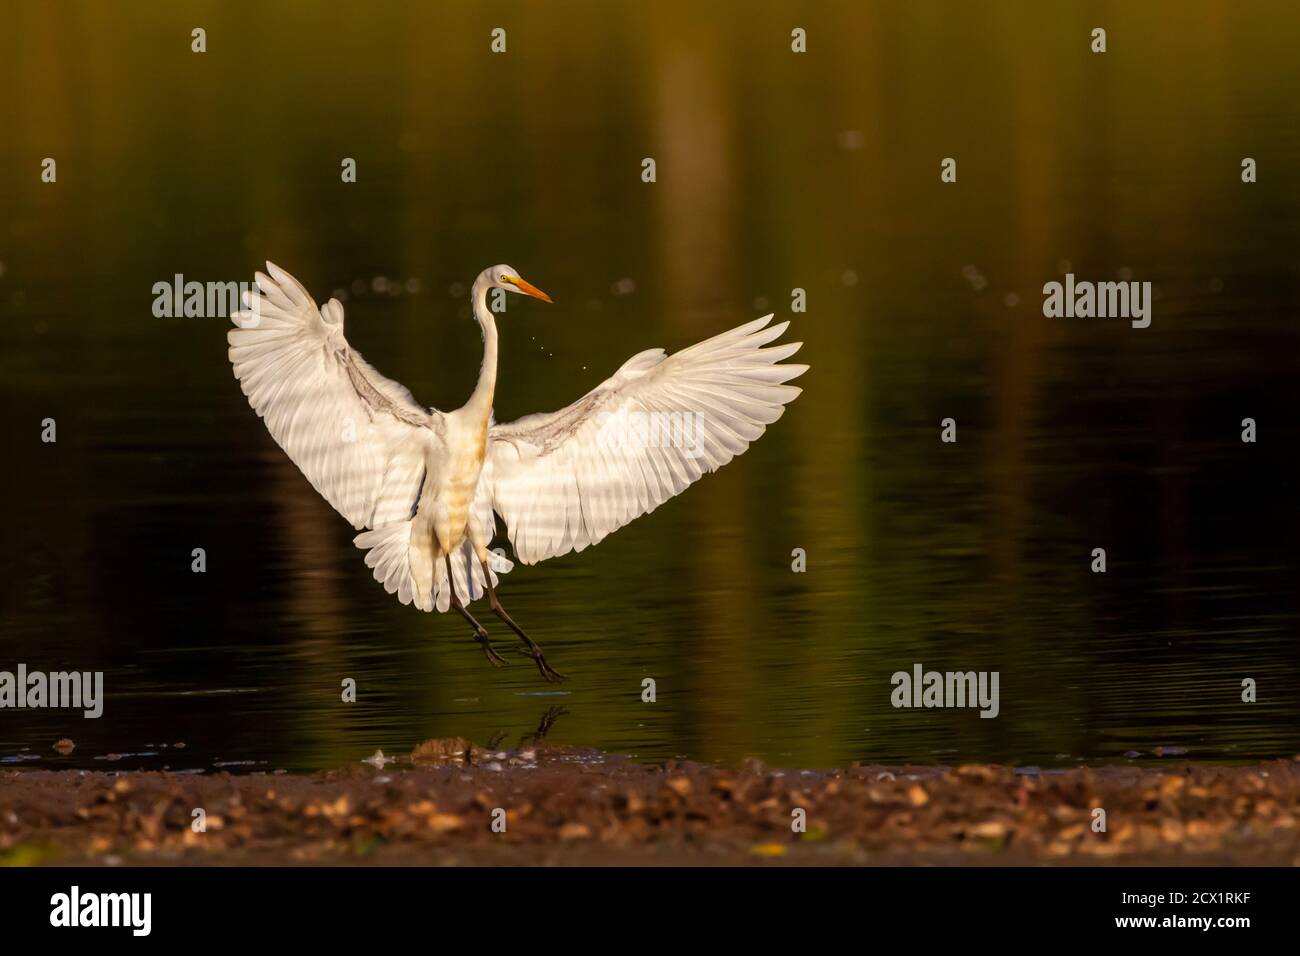 isolated image of a great egret (adrea alba) a.k.a great white heron landing on water at sunset from a flight with wings wide open. A contrasting imag Stock Photo